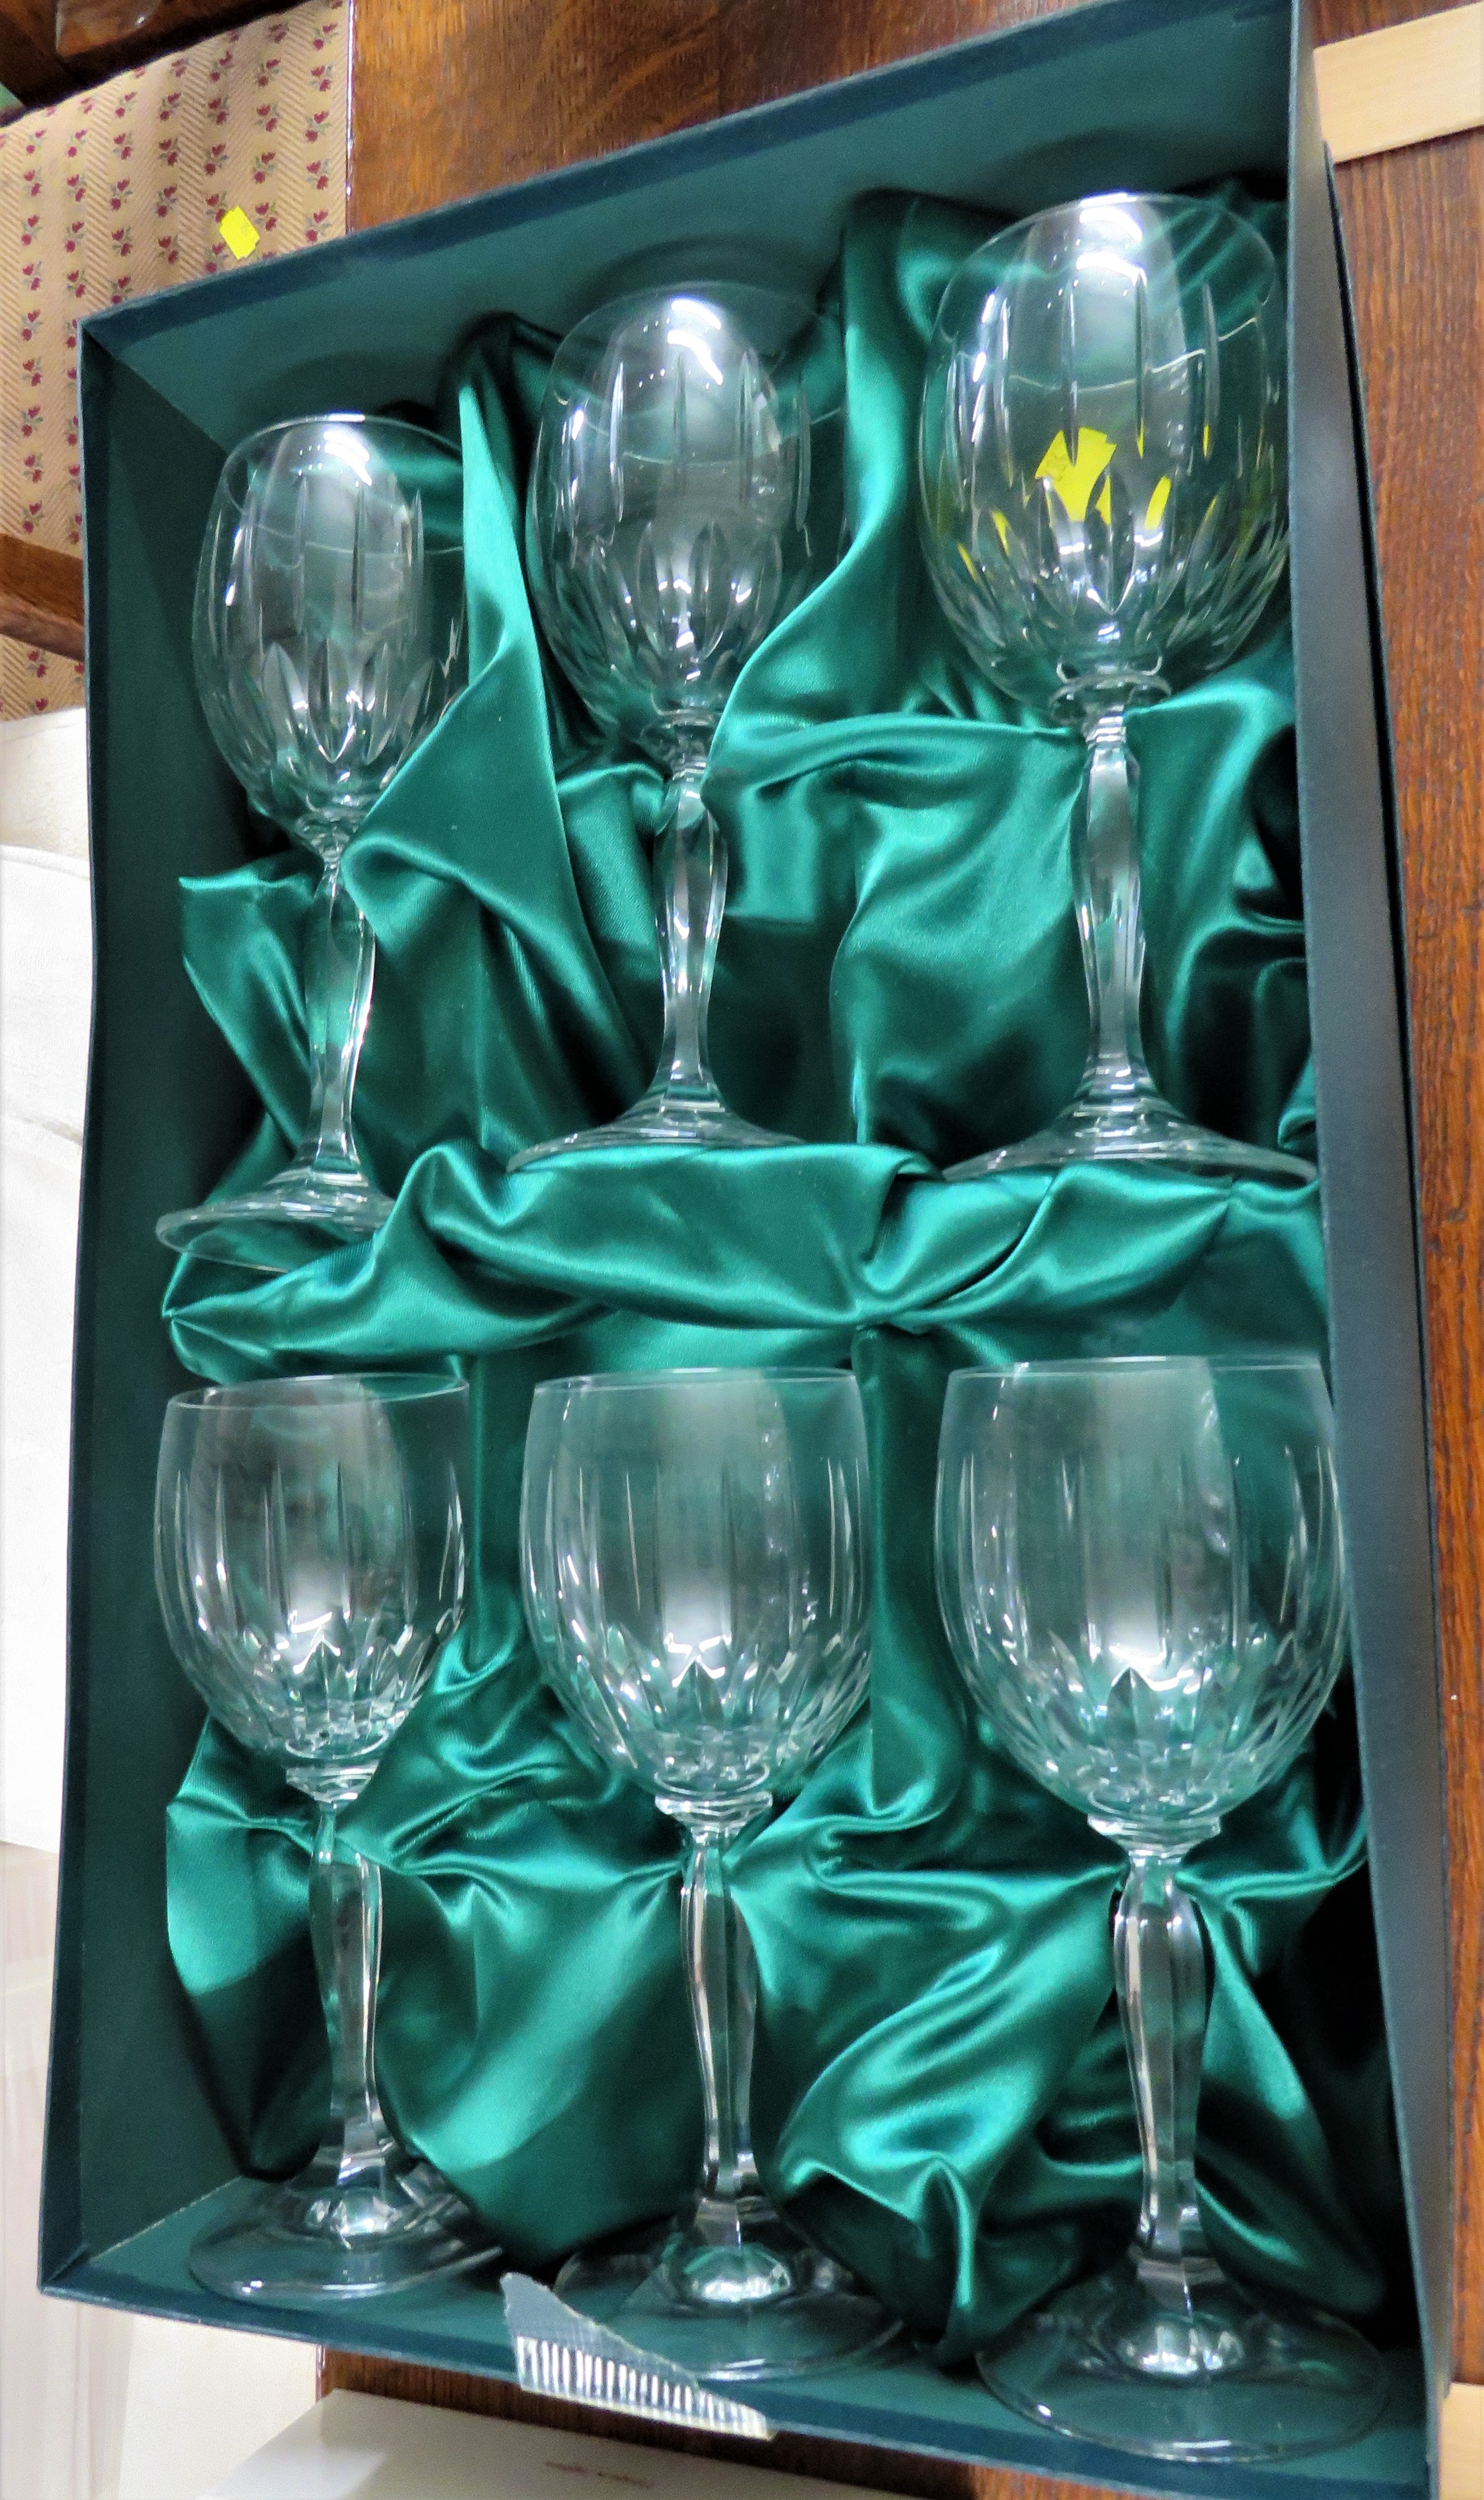 THE LAKES COLLECTION BOXED SET OF SIX CUT GLASS WINE GLASSES TOGETHER WITH MATCHED SET OF DRINKING - Image 2 of 2